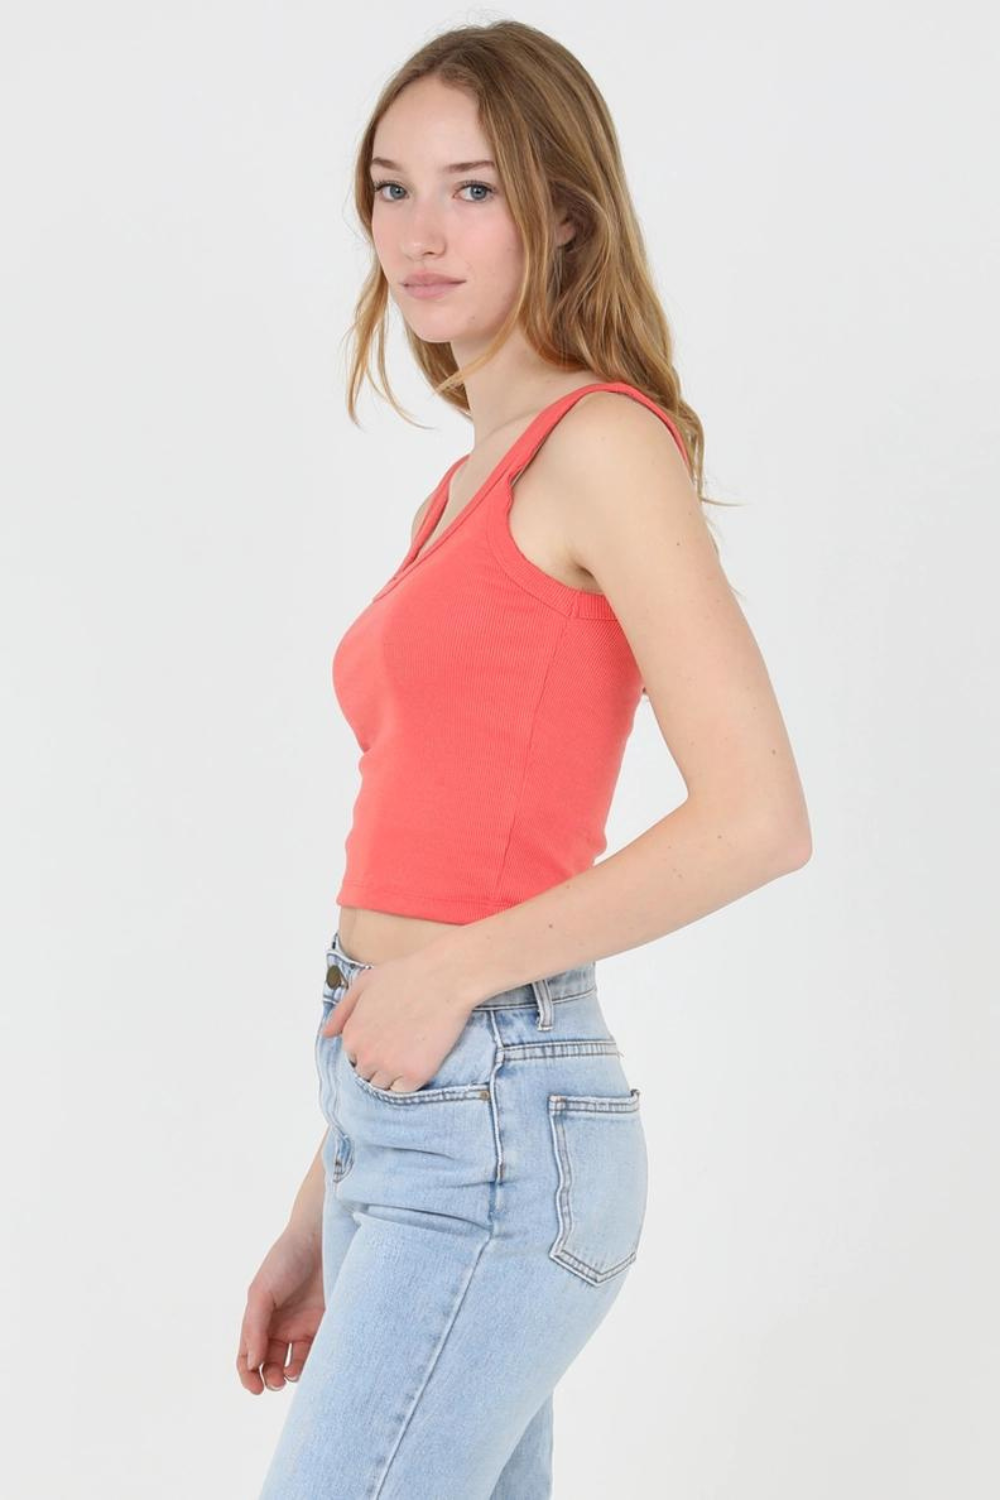 Angie Ribbed Scoop Neck Tank Top - Sunset Coral